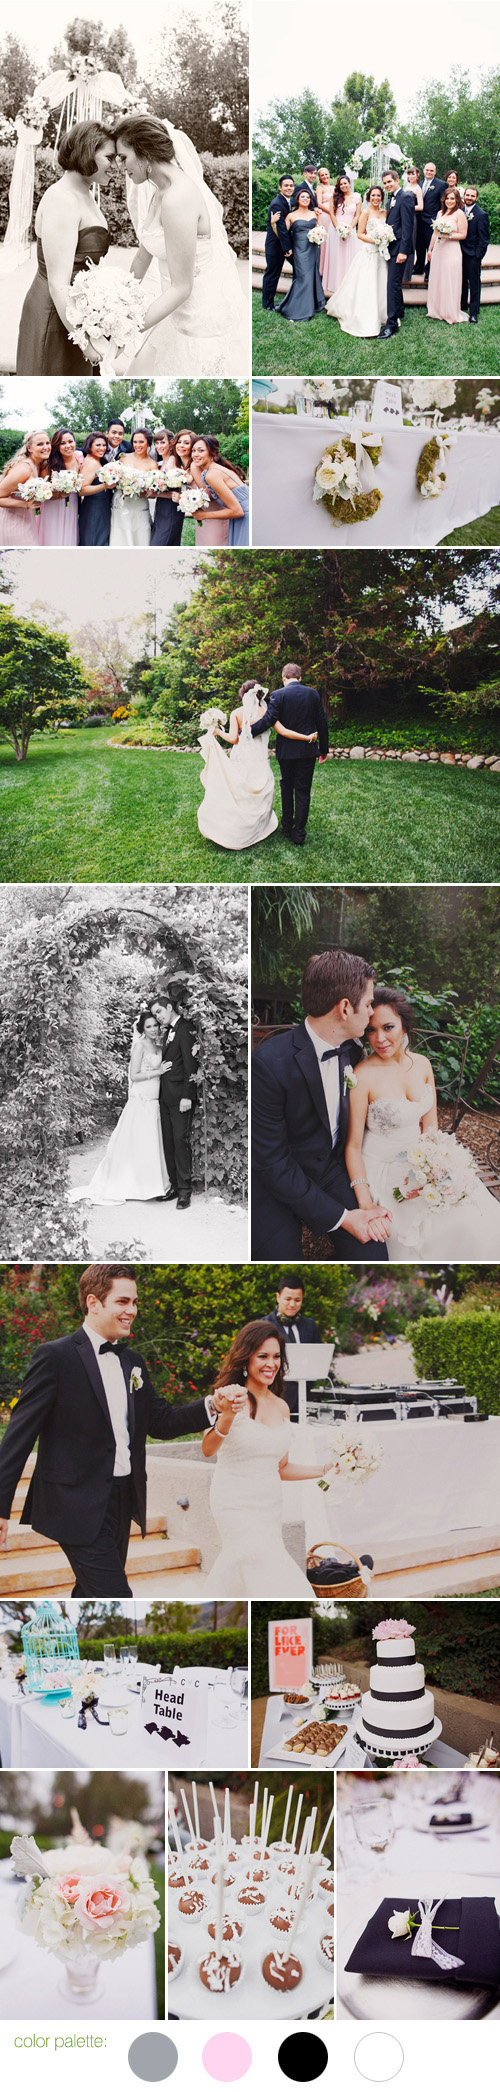 blush pink, dove gray, black and white Great Gatsby and Coco Chanel inspired wedding at Maravilla Gardens, California, photos by Christine Farah Photography